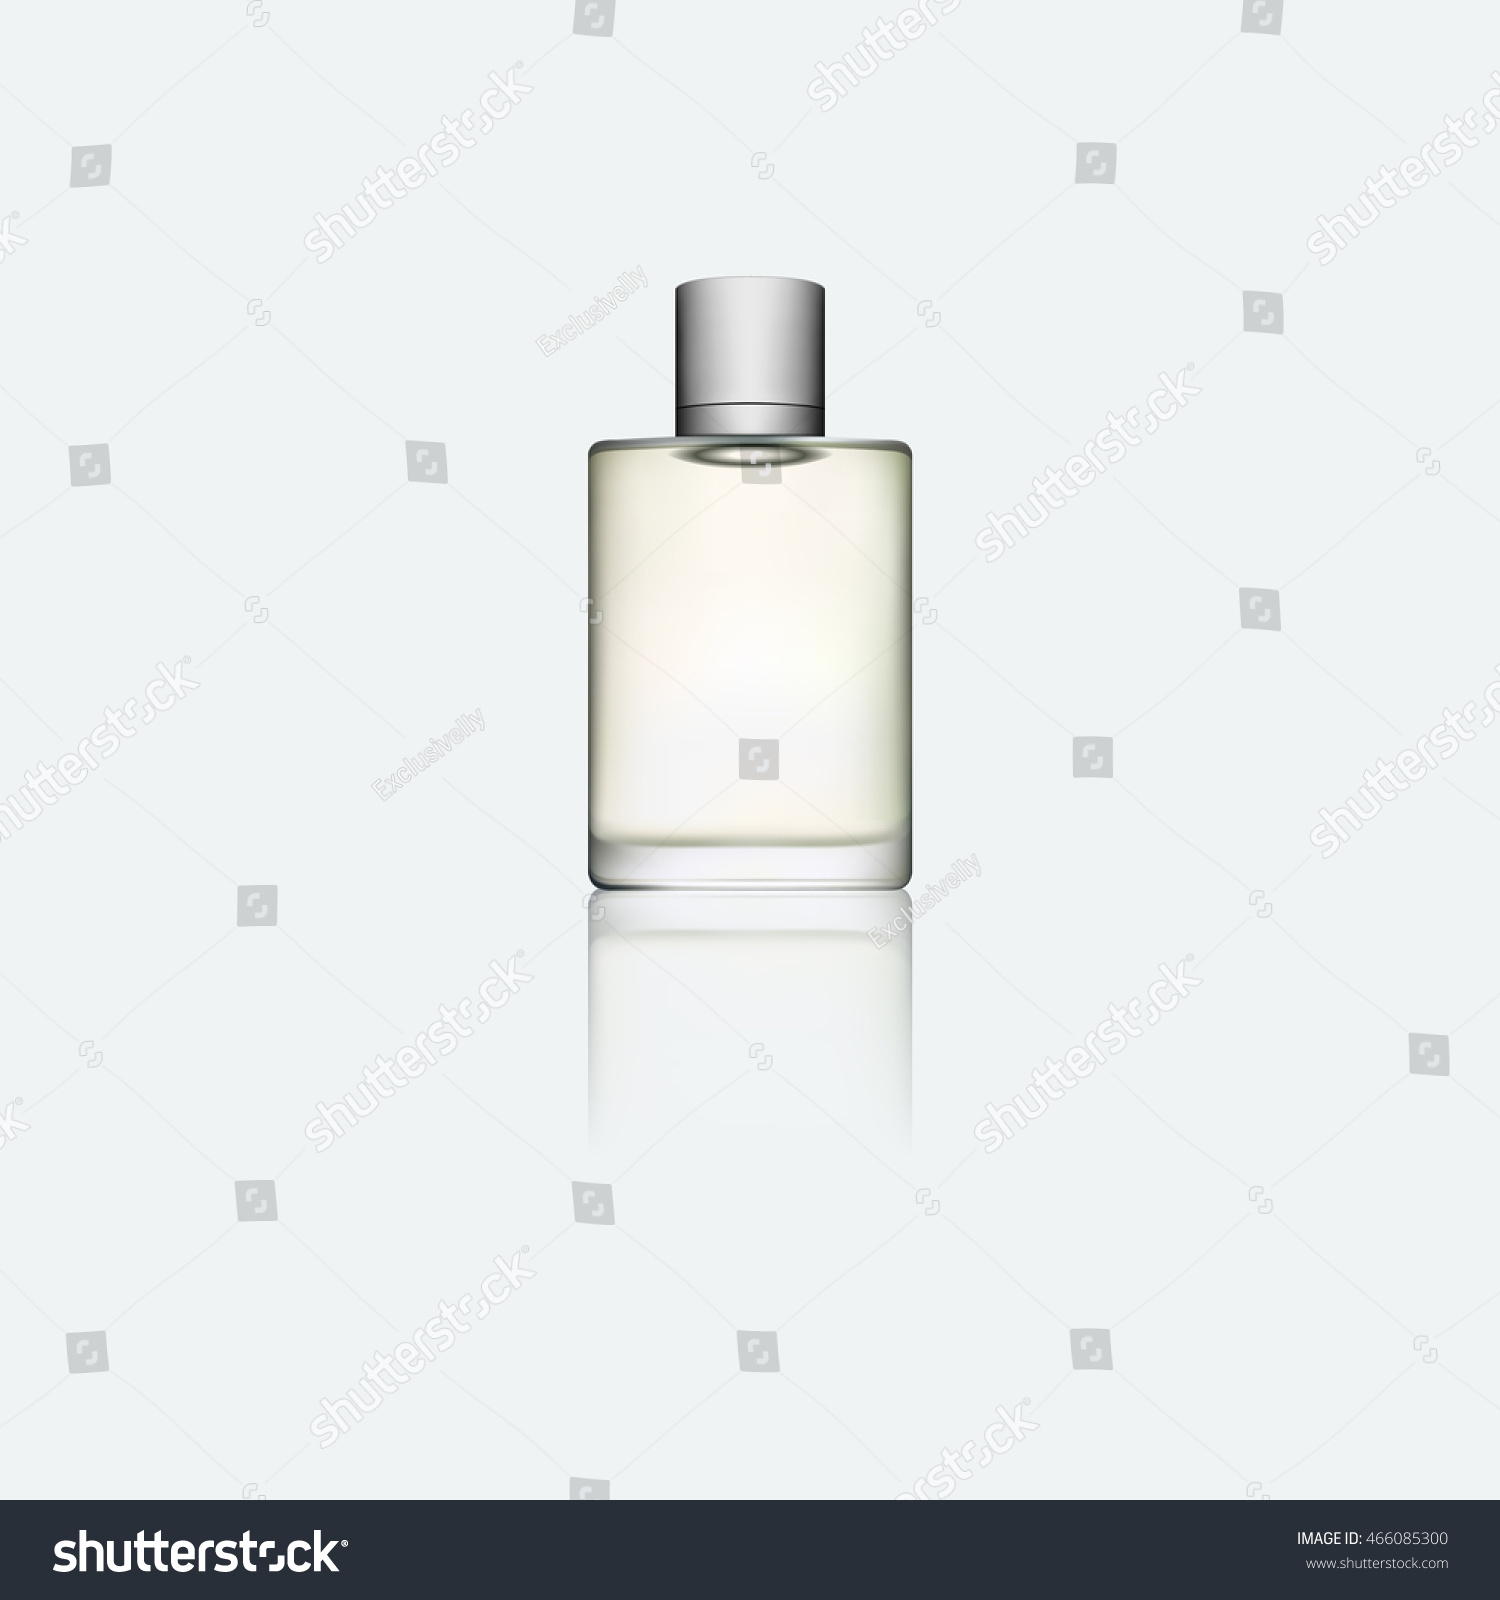 SVG of Perfume bottle isolated on white photo-realistic vector 3D illustration. svg